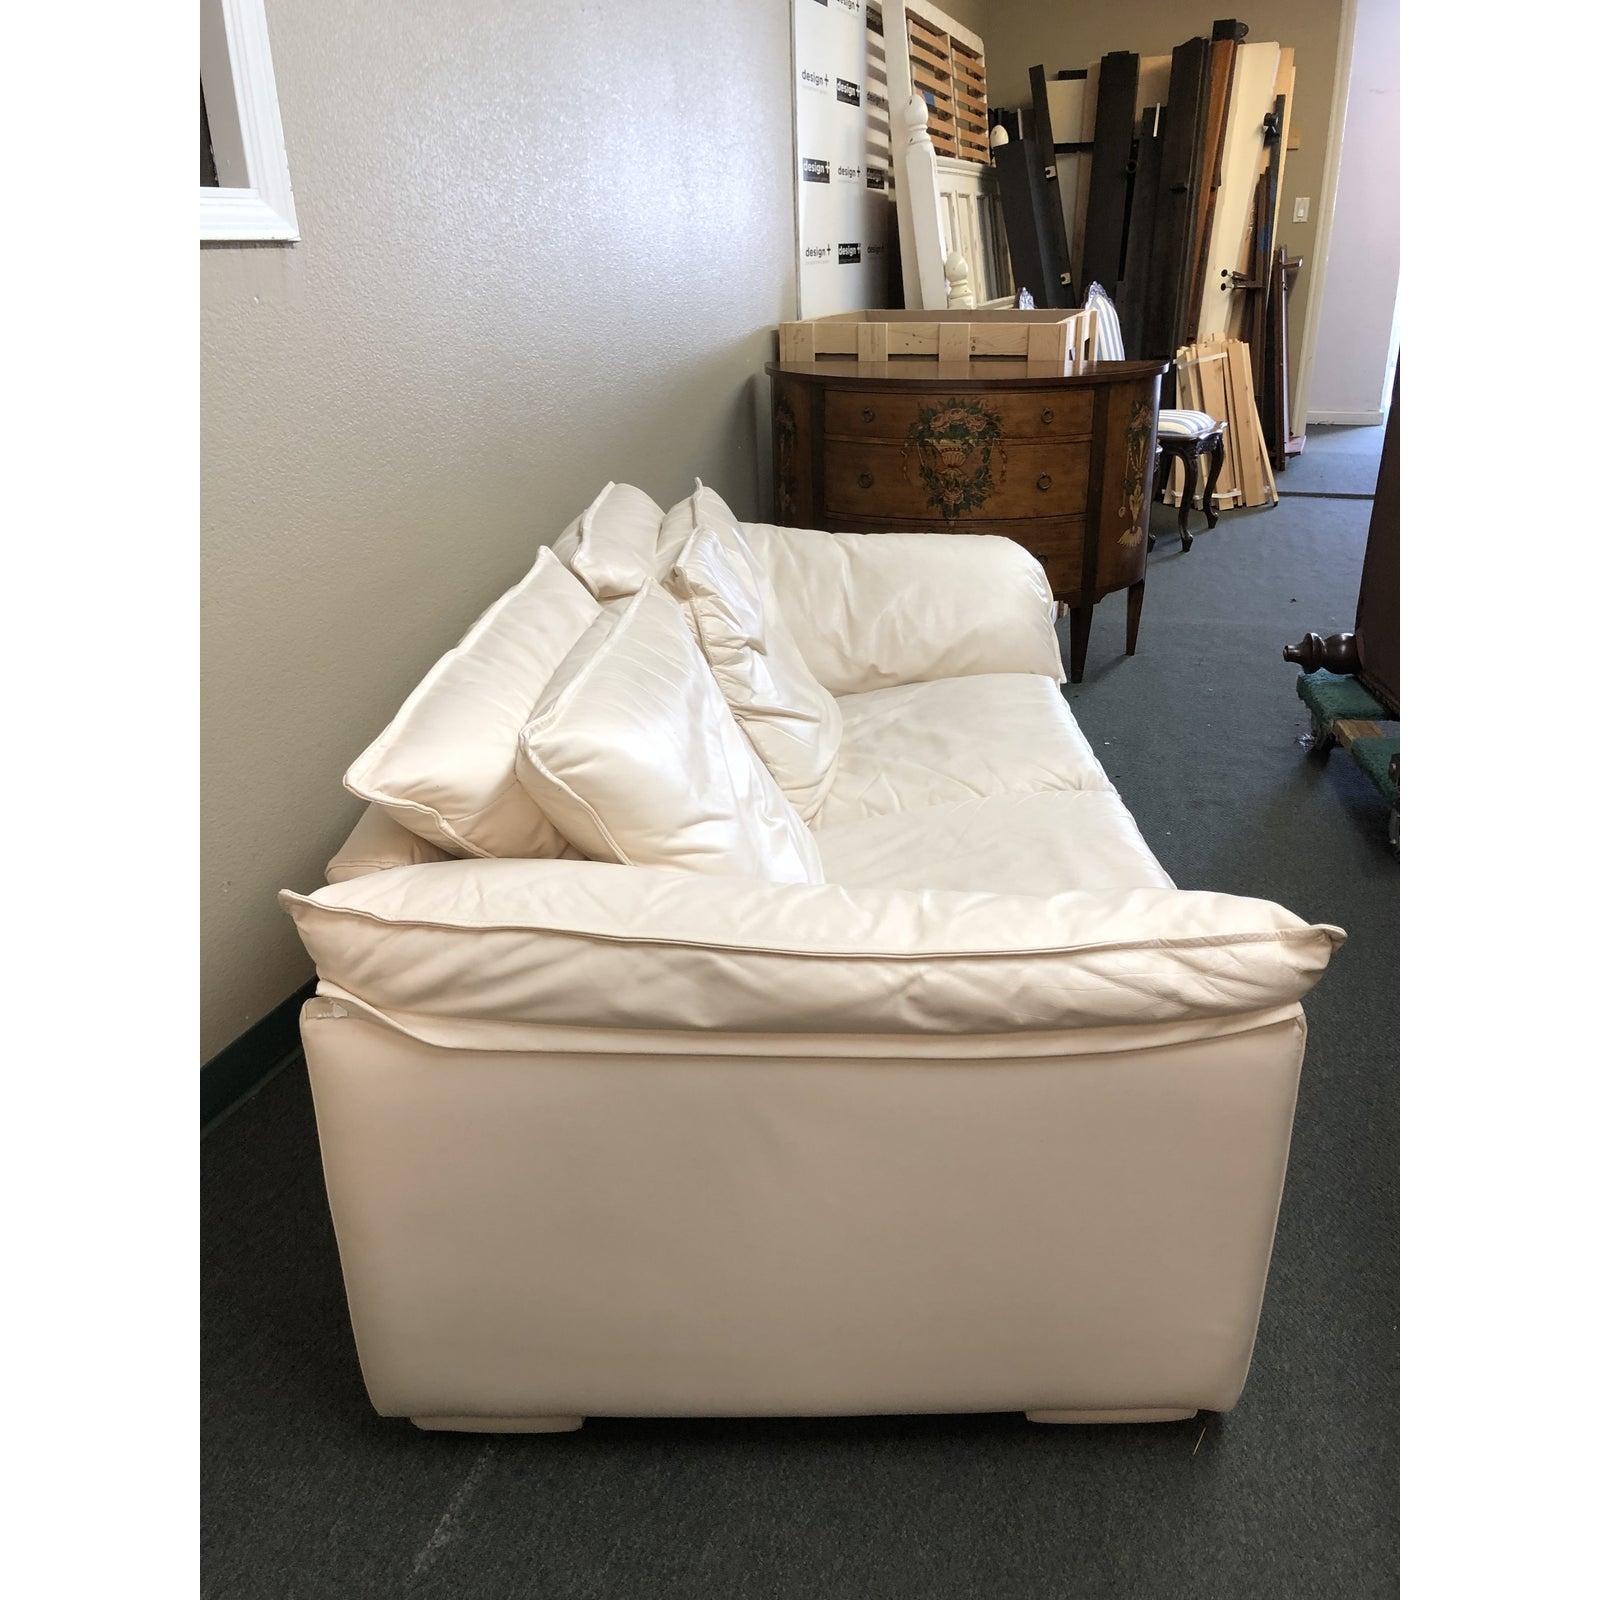 Presents a retro loveseat by Leather Center. The soft, neutral leather is the star here, enveloping the large lounge frame that invites comfort. Attached cushions are foam filled.

Original price $3,000.

 